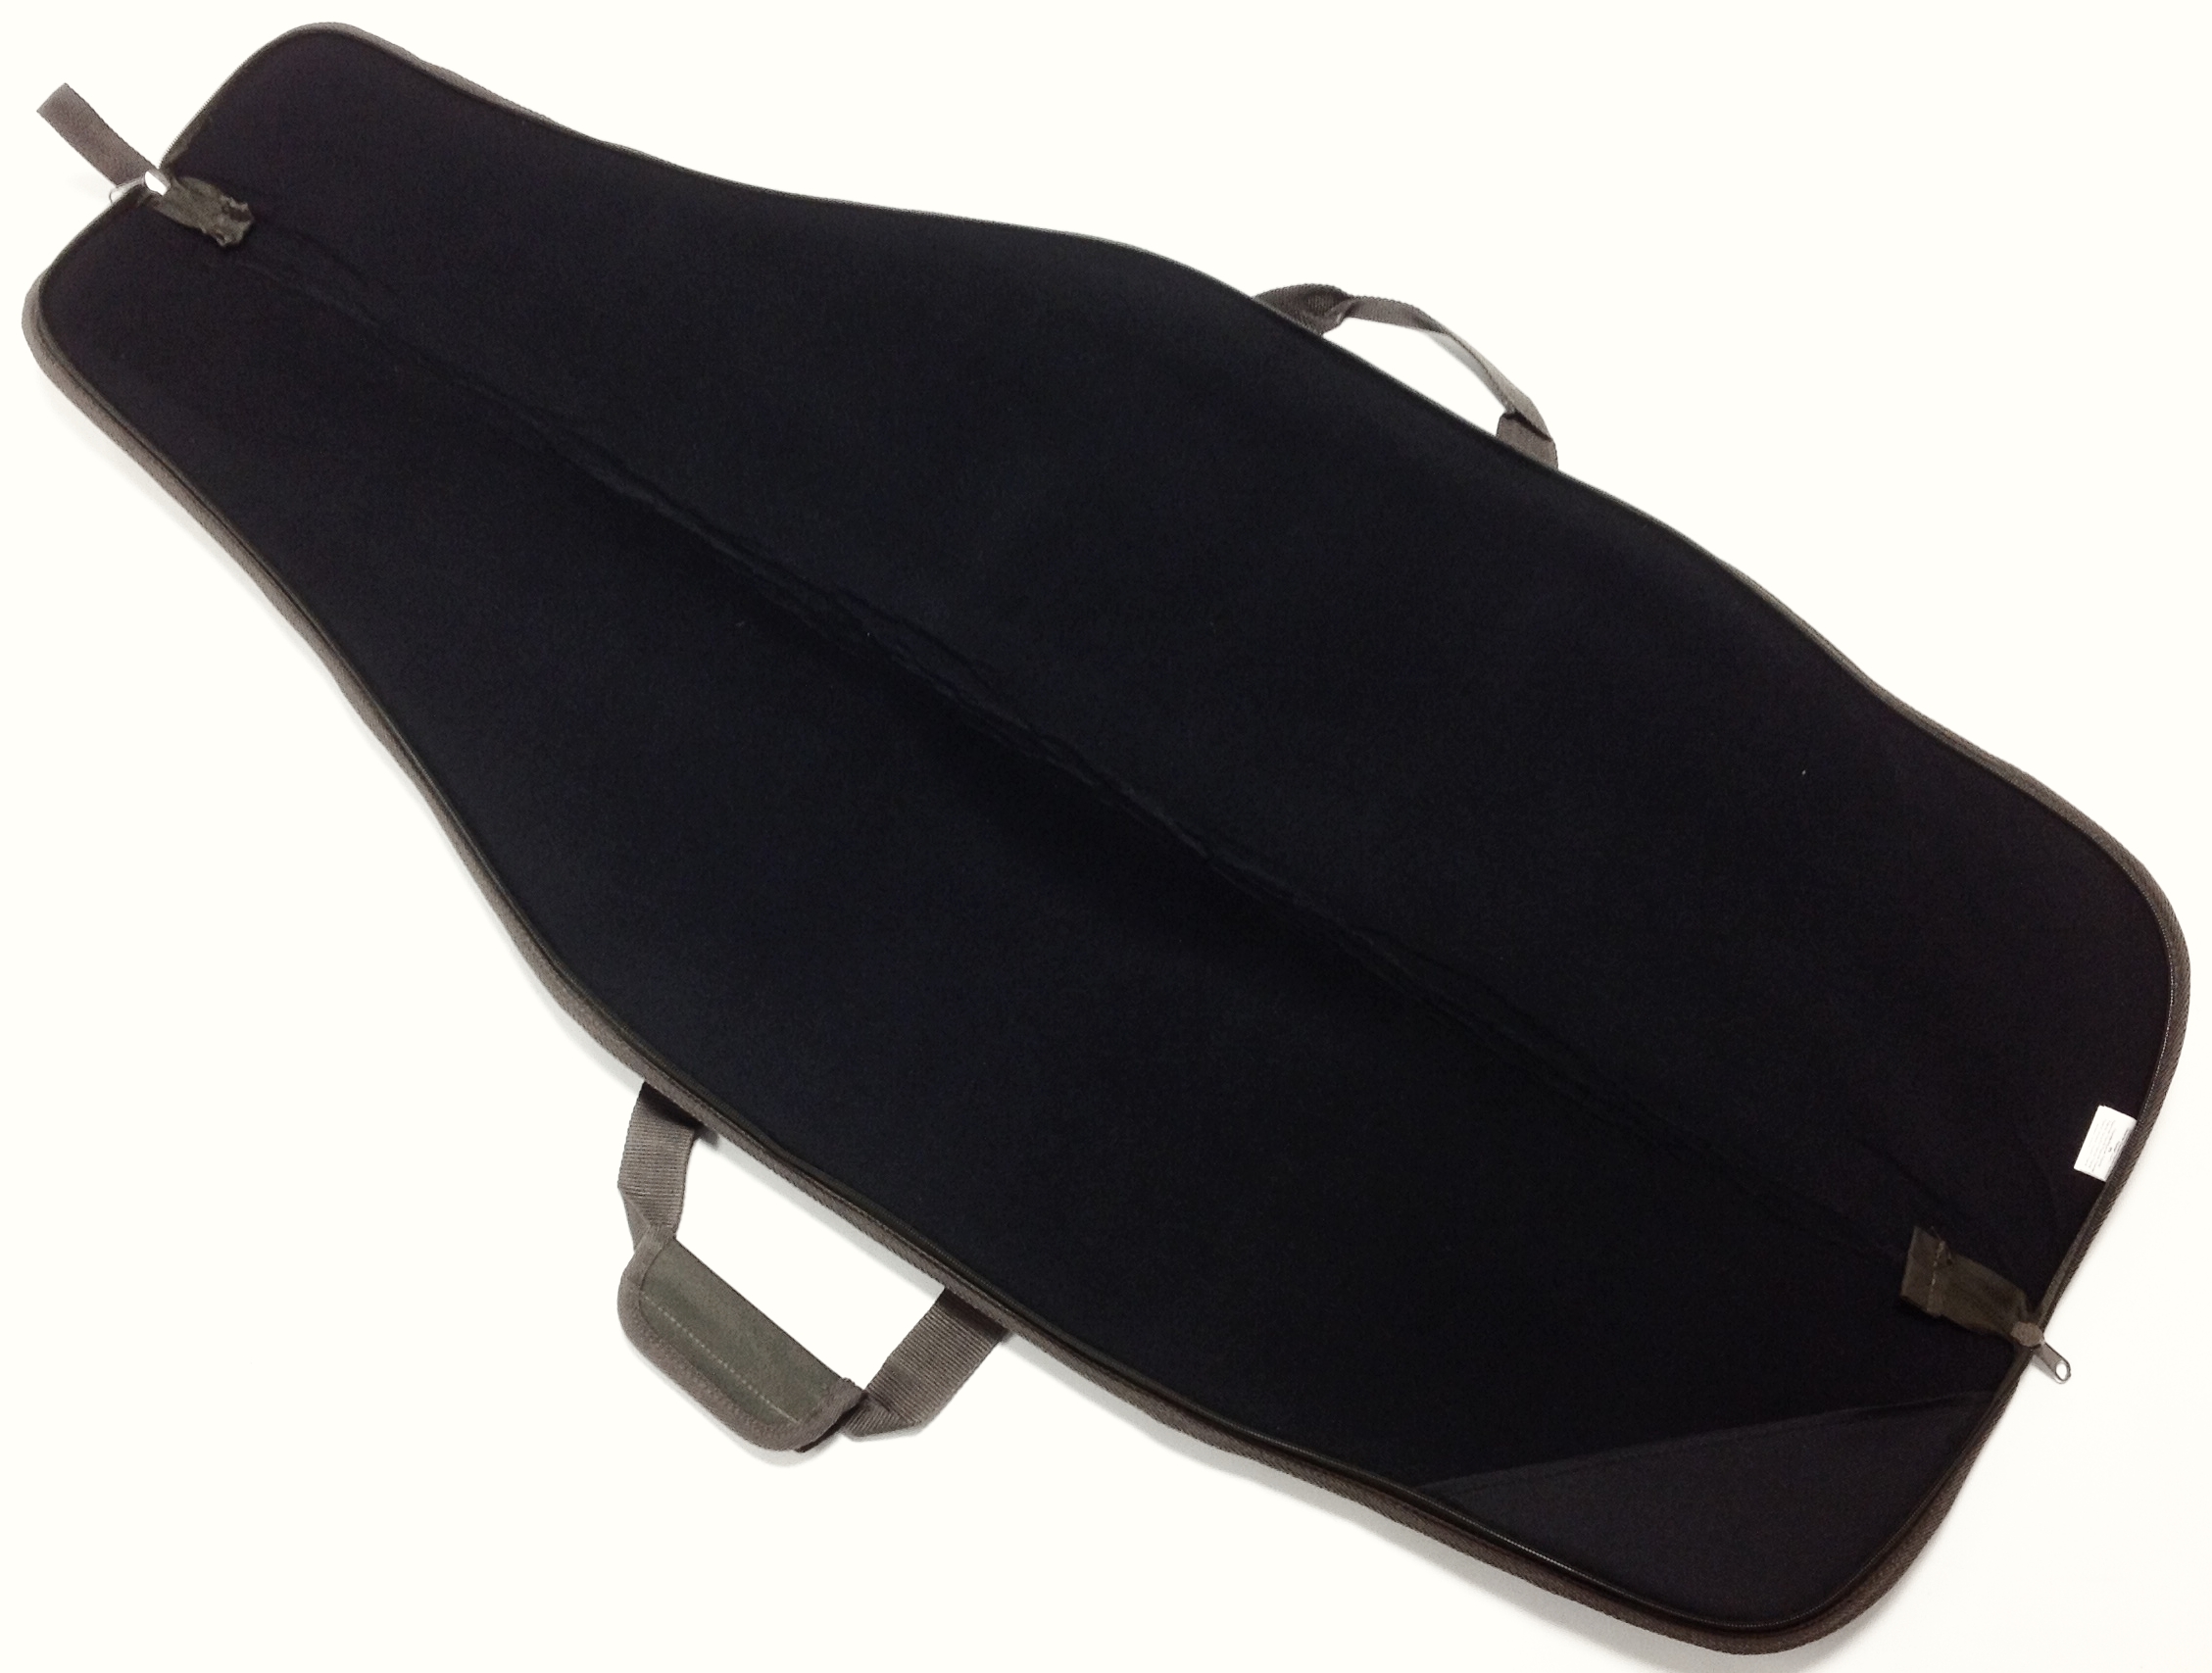 Percussion Normandie 50" Padded Rifle Bag